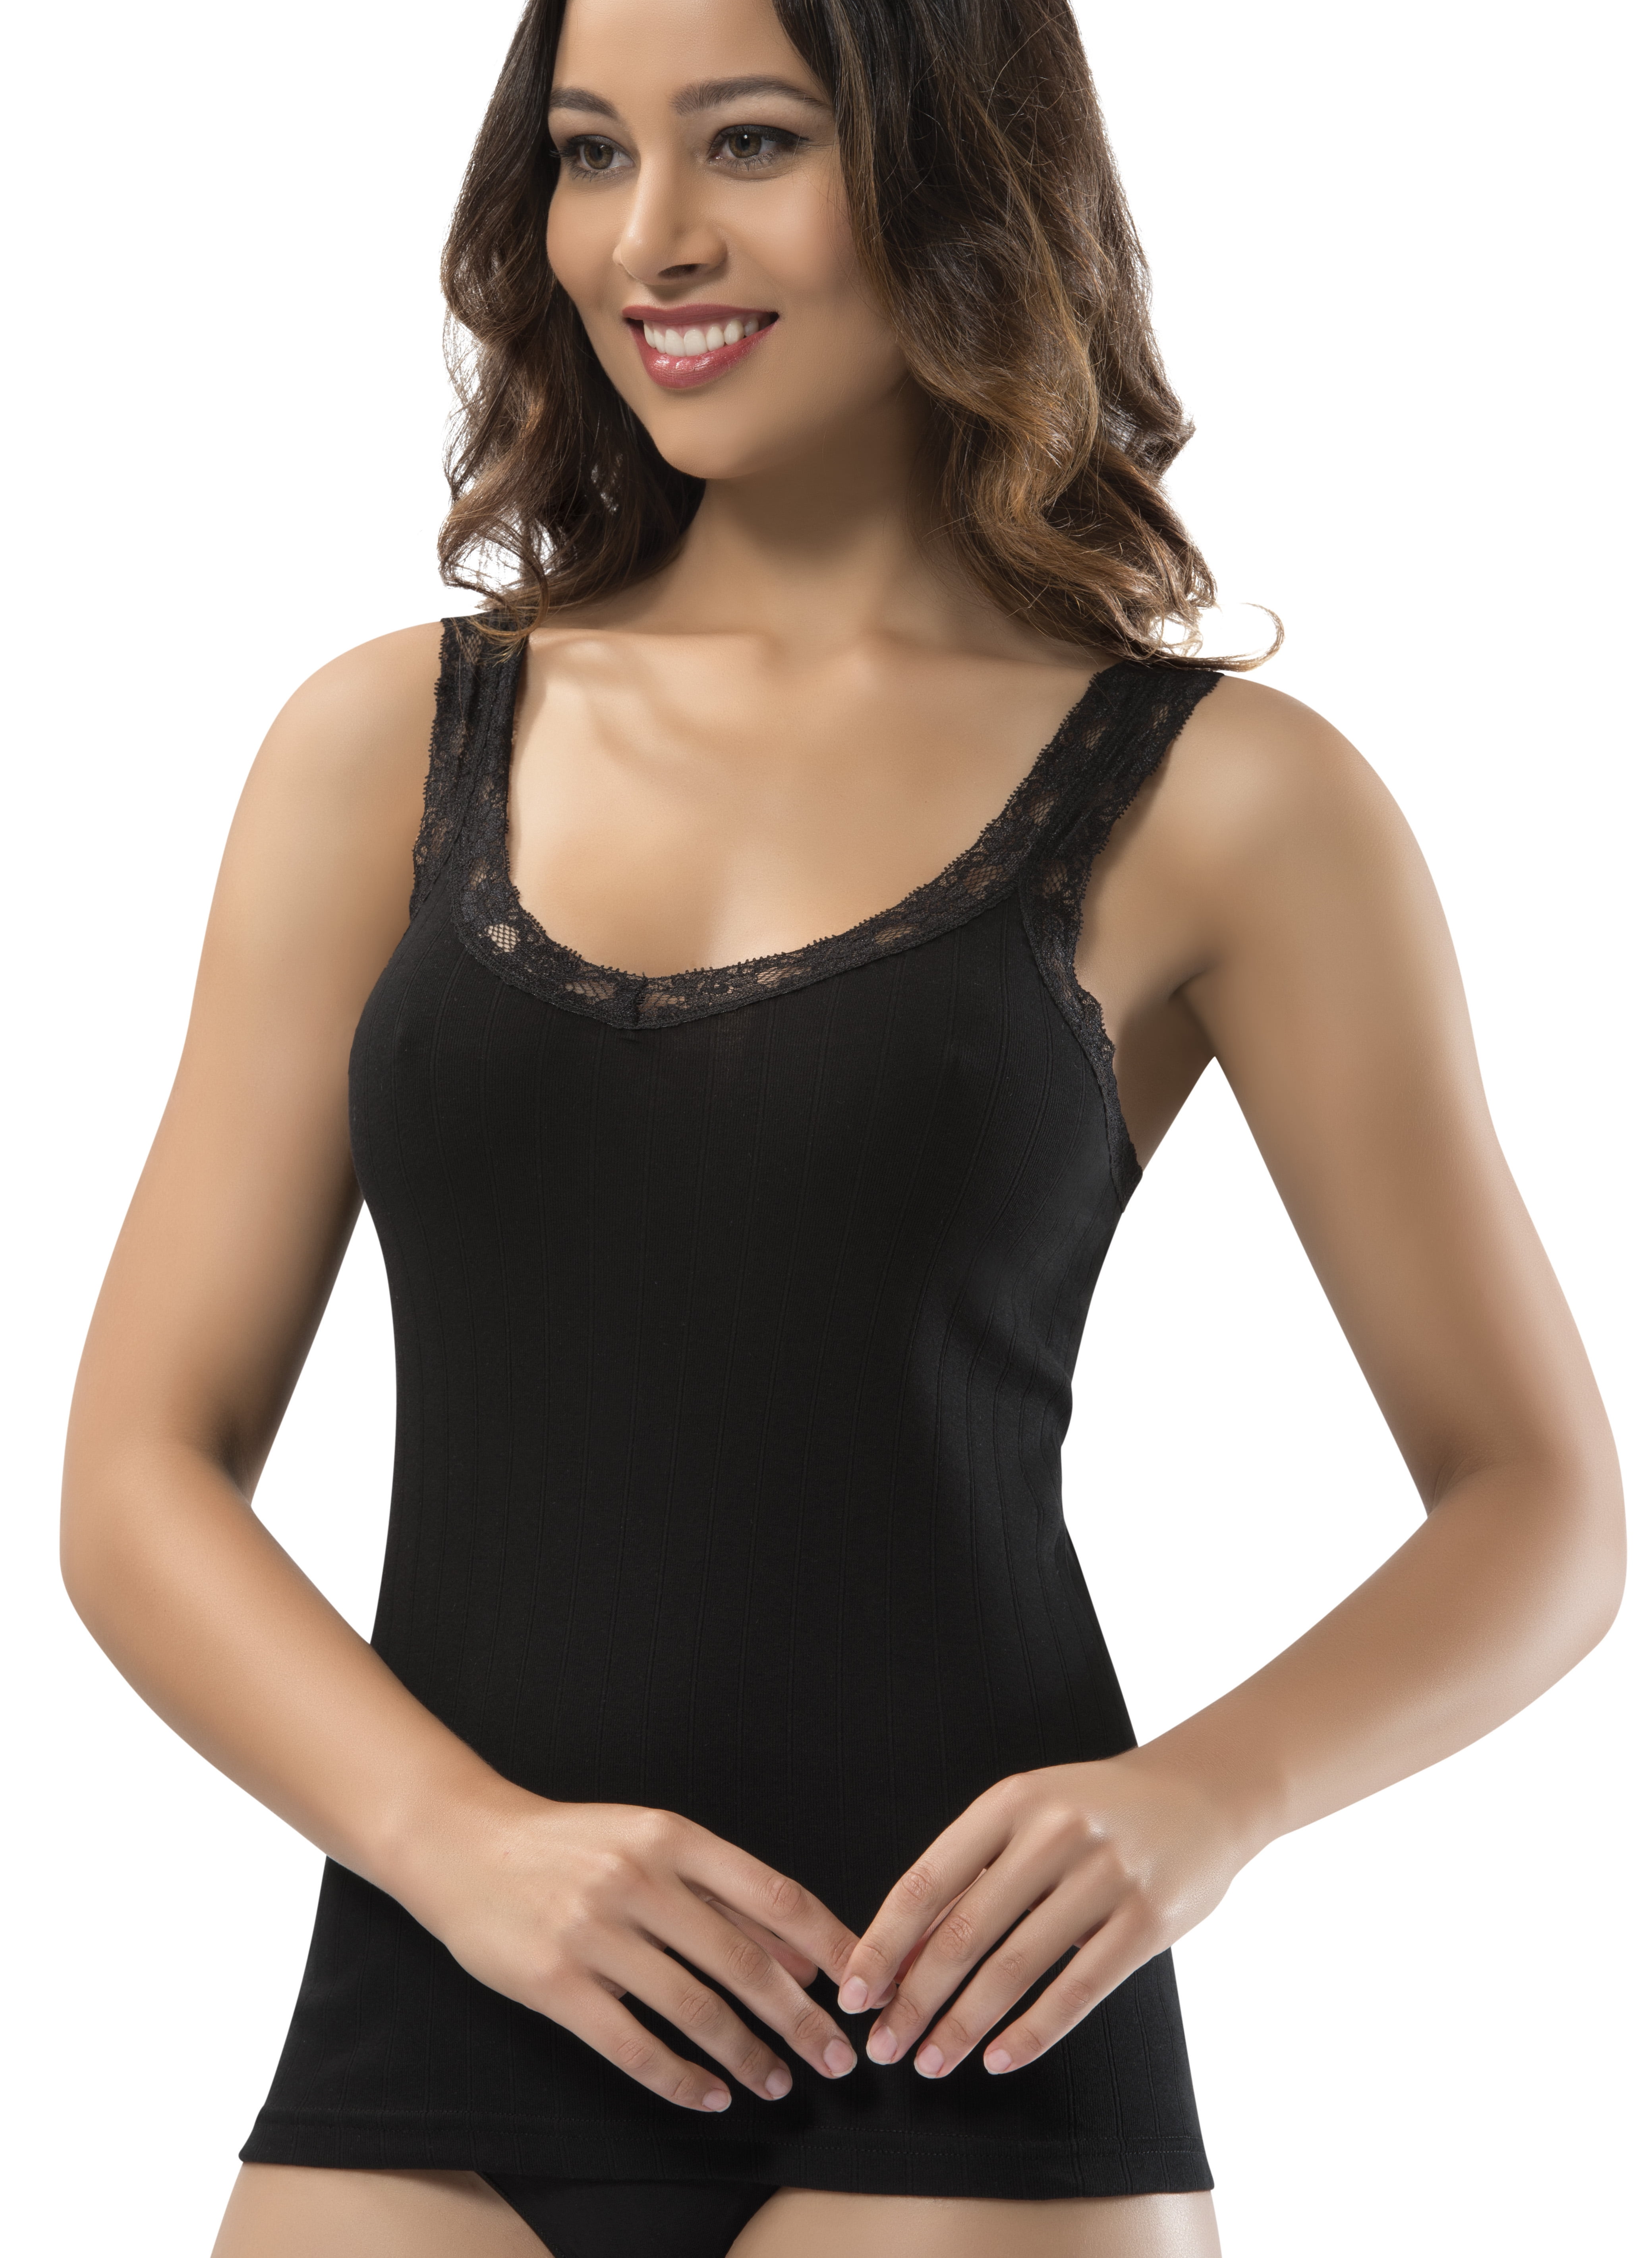 Camisole for Women, 100% Cotton, Airy Soft Comfy Lace Cami Tank Tops  Undershirt (Black/Lace Strap, Small) 